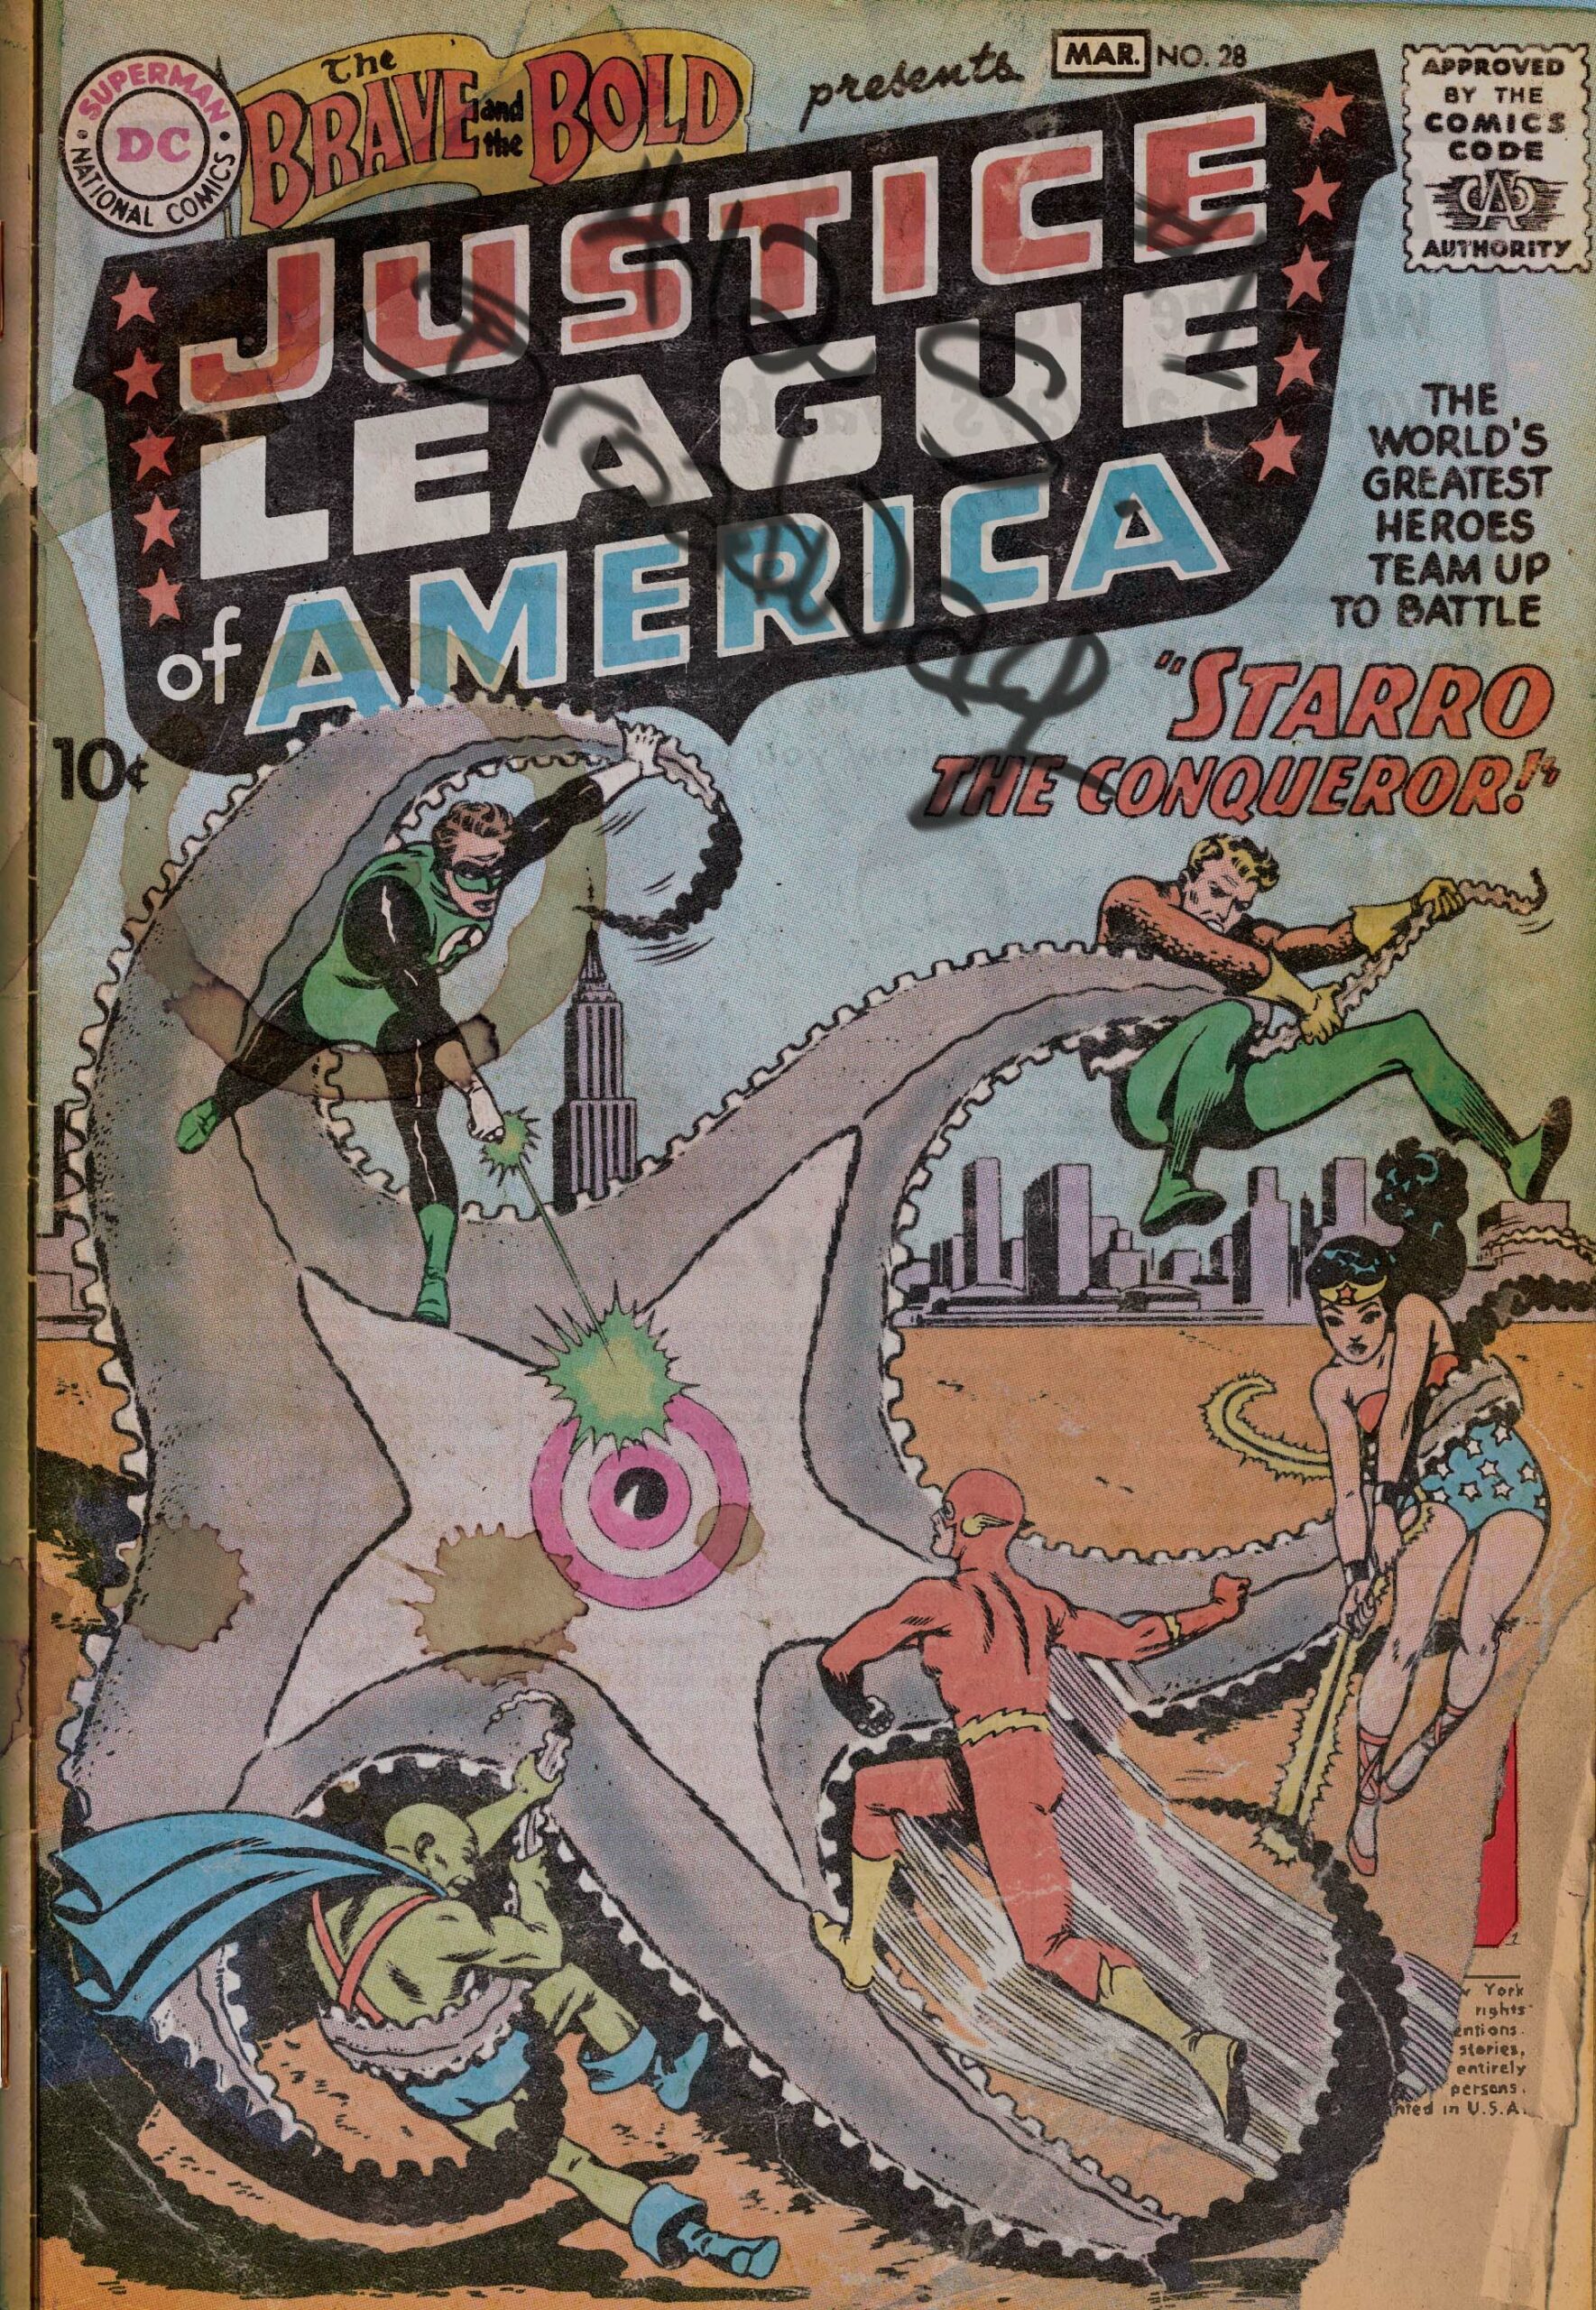 DC Comics The Brave and the Bold Justice League of America MAR. NO. 28  Reprint